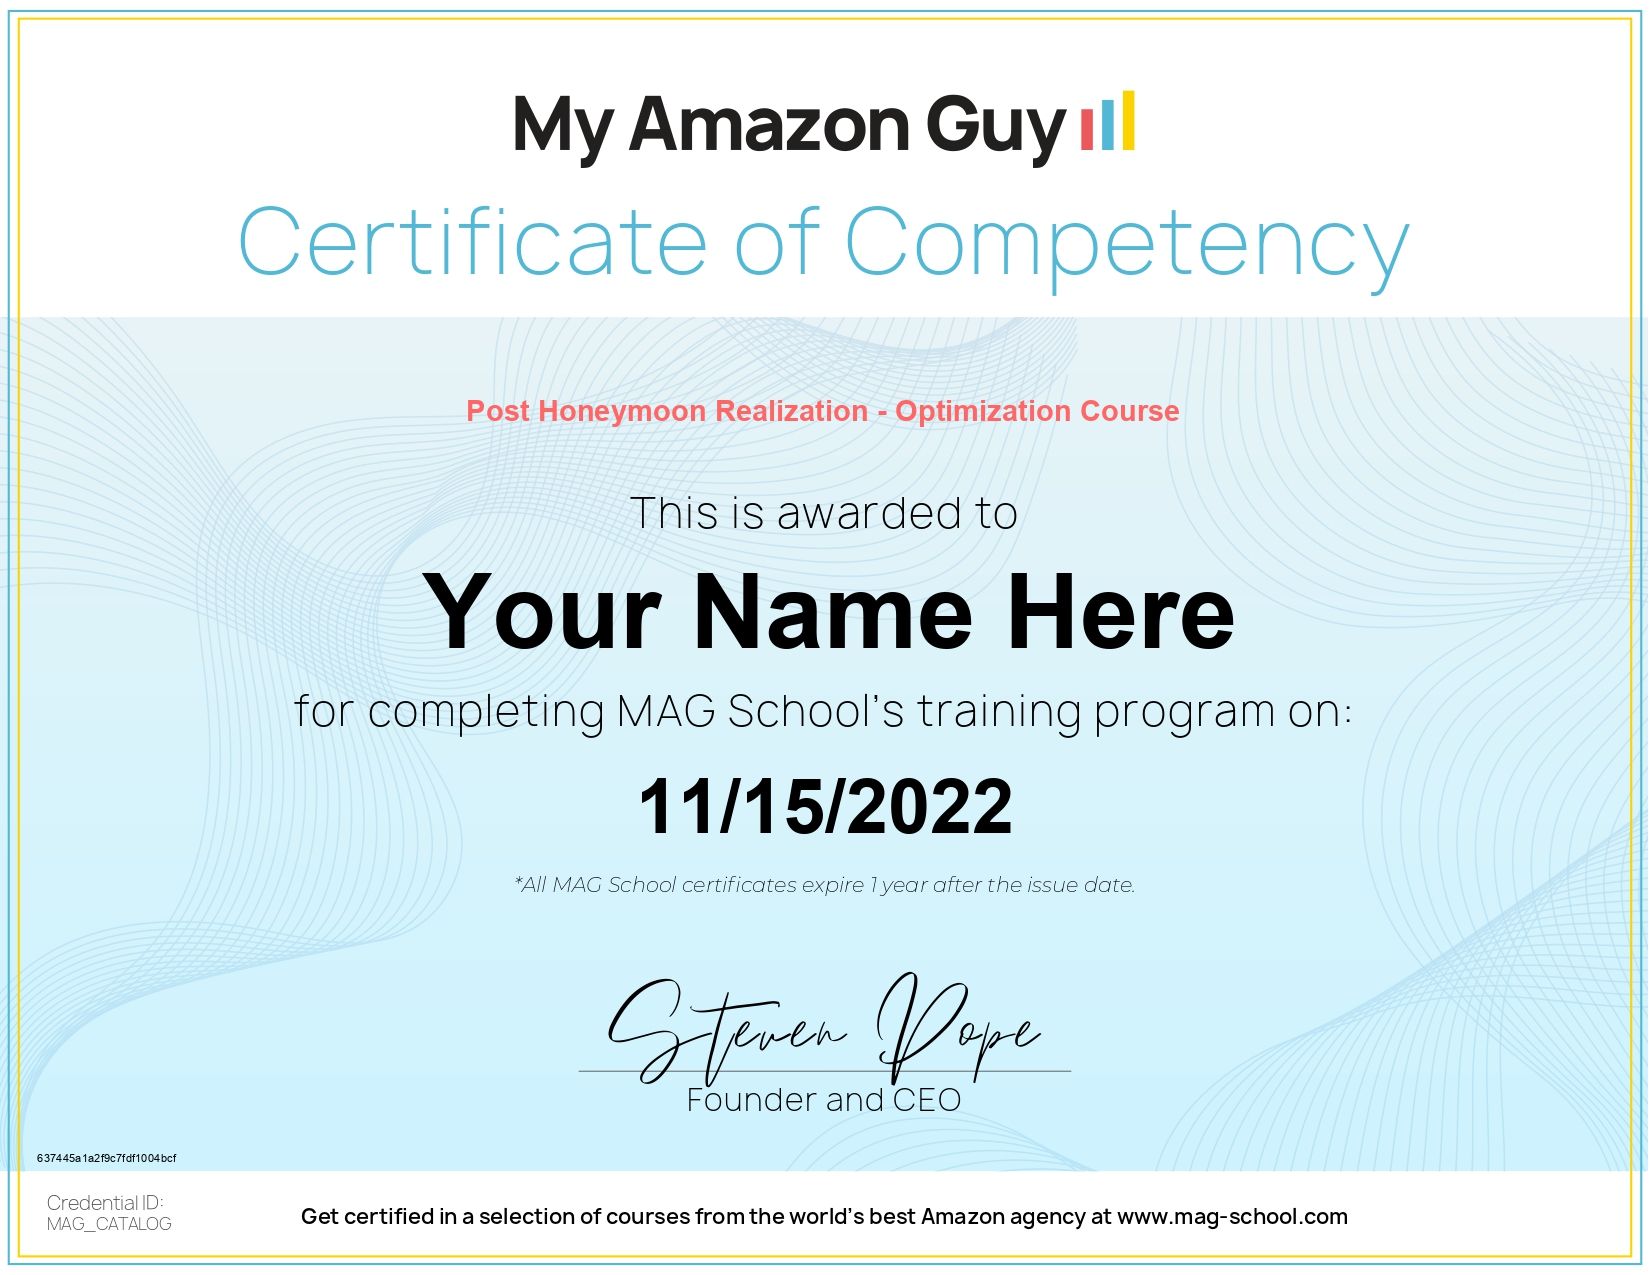 Building a Variation on Amazon Course